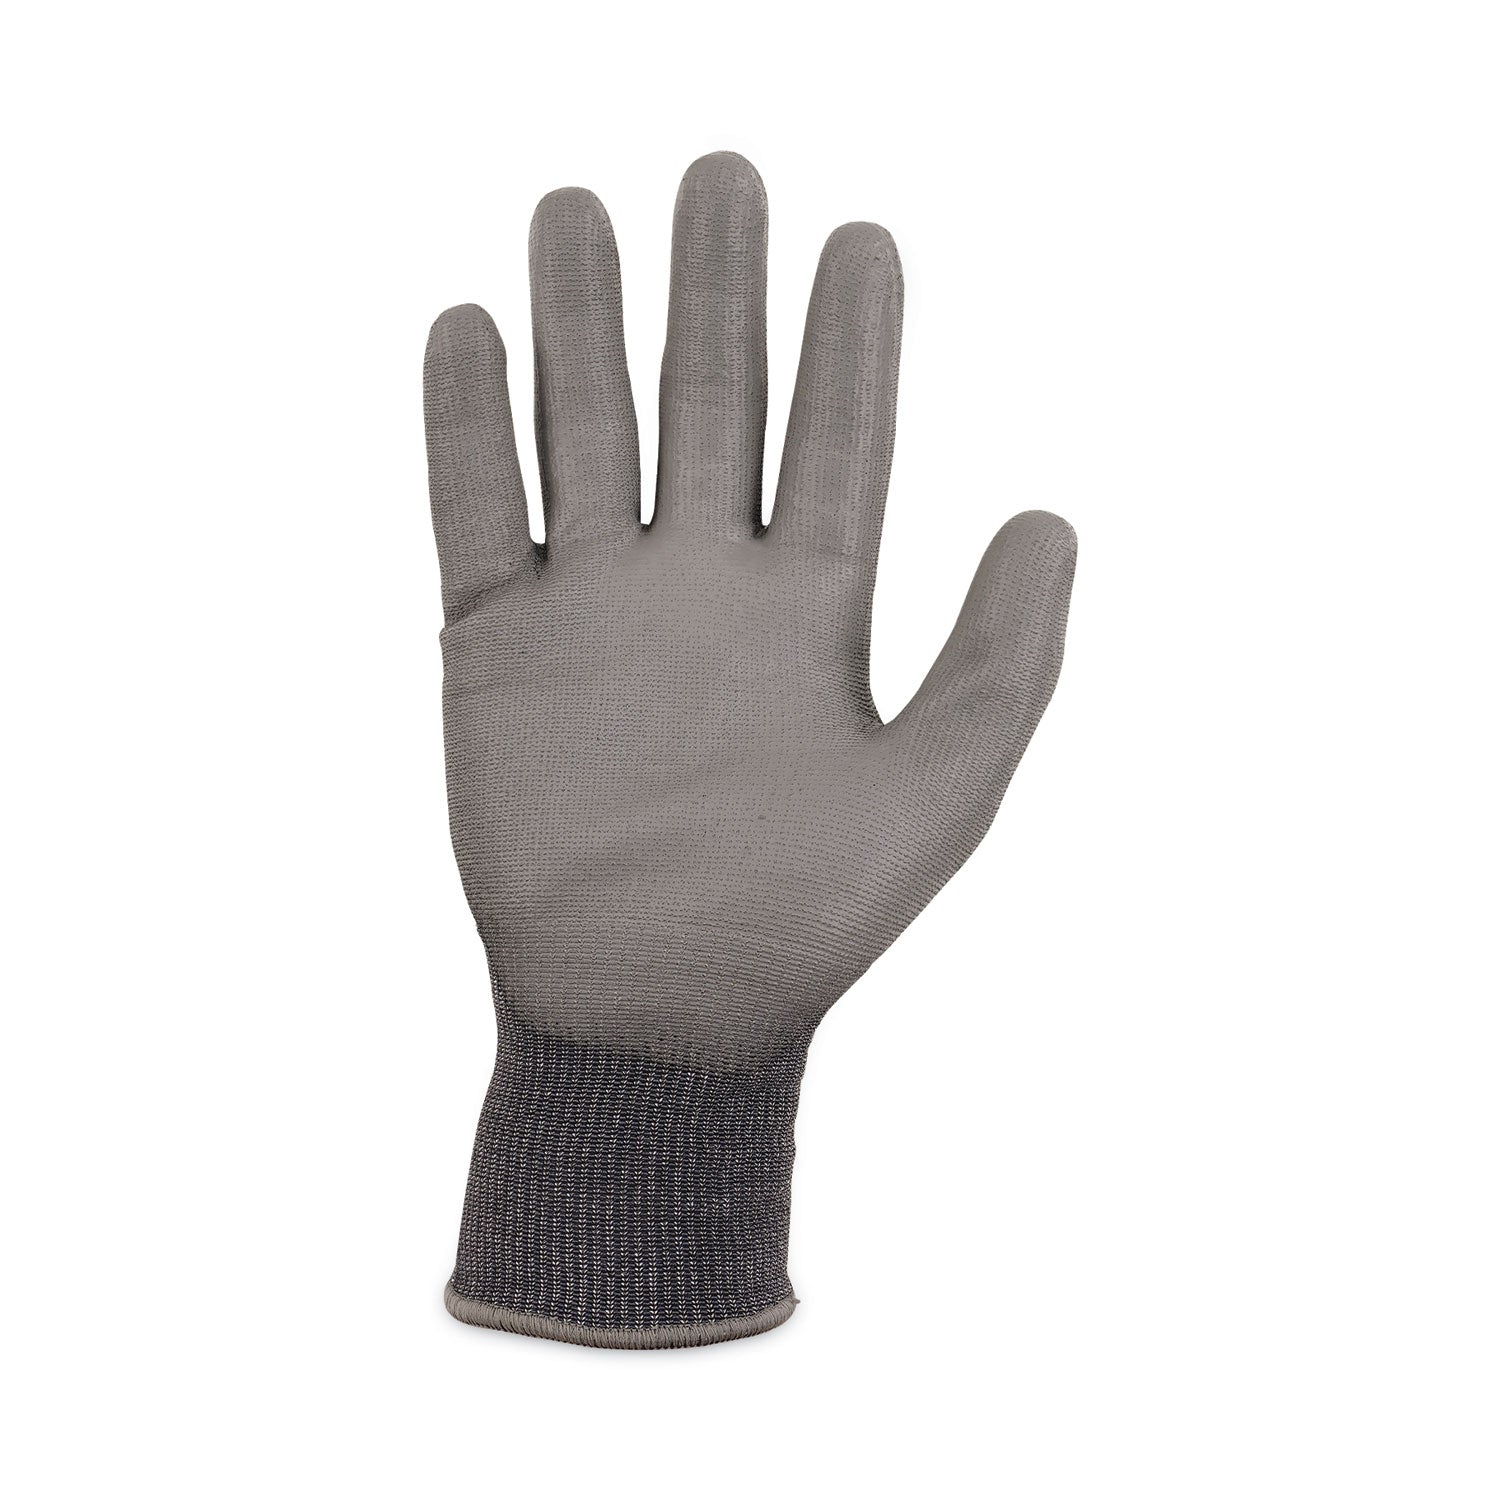 proflex-7044-ansi-a4-pu-coated-cr-gloves-gray-small-pair-ships-in-1-3-business-days_ego10492 - 2